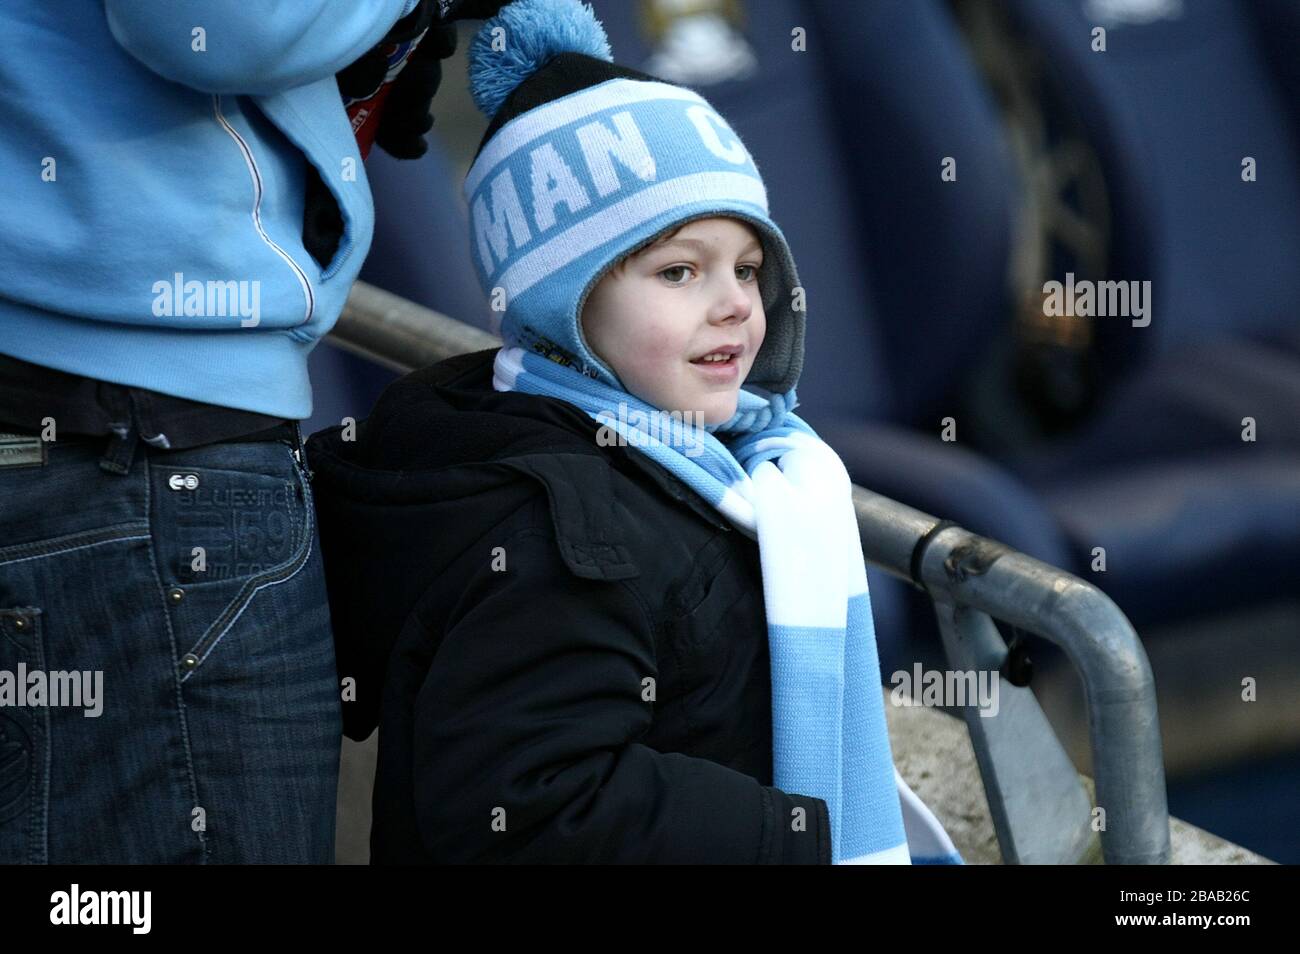 A young Manchester City fan in the stands Stock Photo